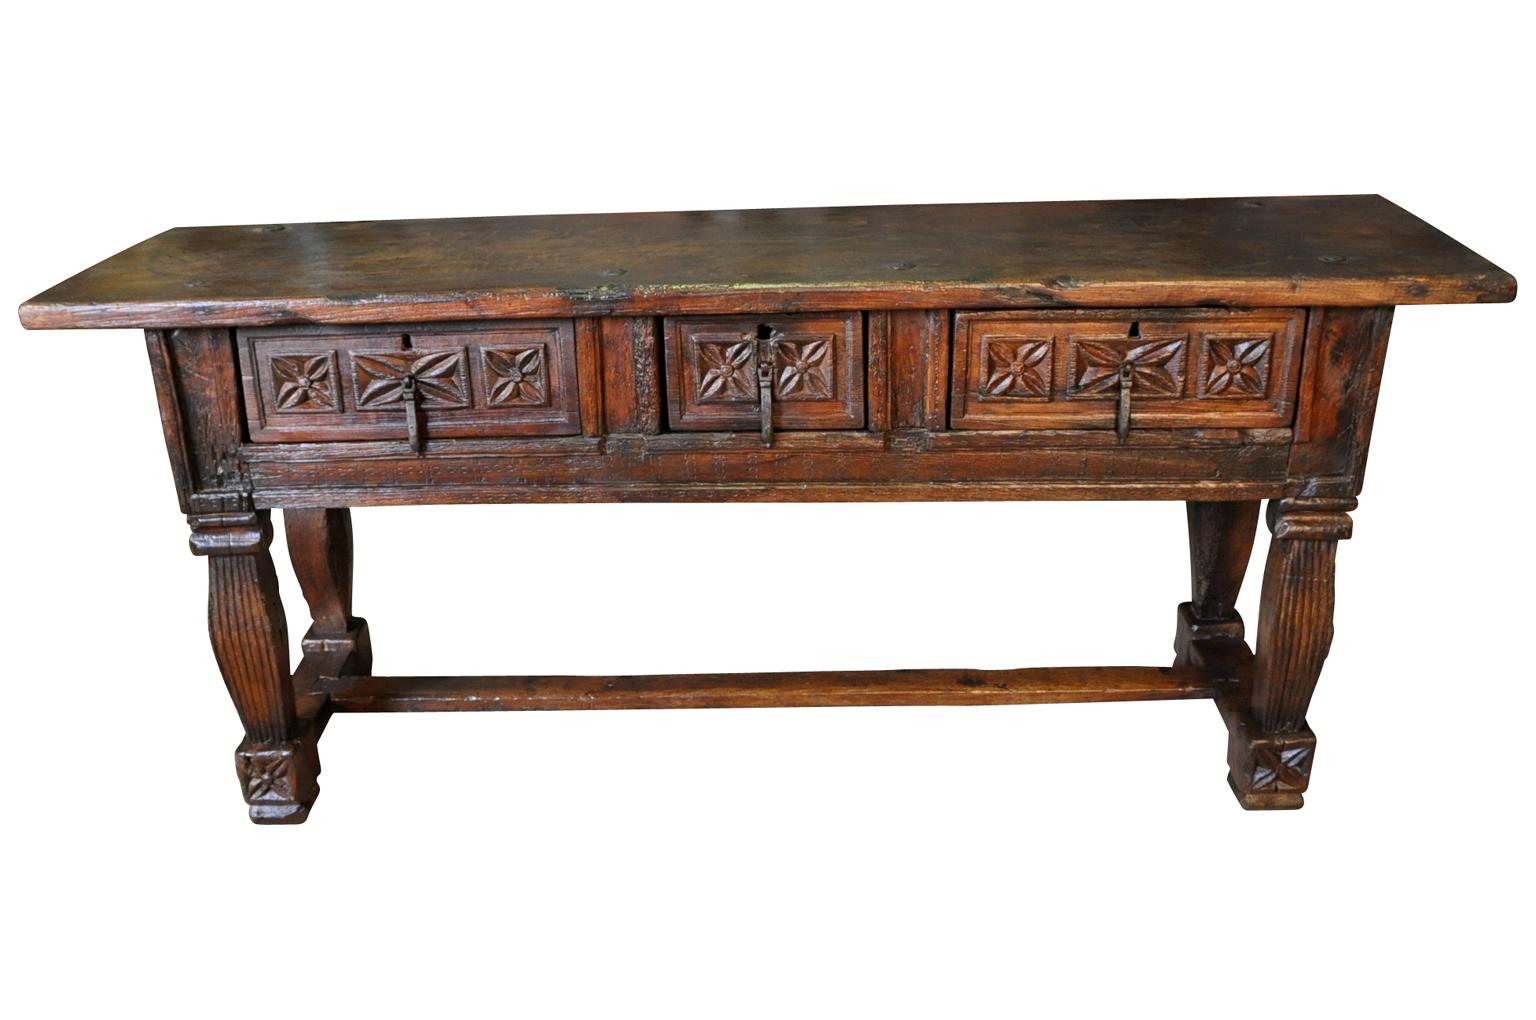 A very handsome 17th century console table from Tuscany. Wonderfully constructed from beautiful chestnut with three drawers and a solid board top. Gorgeous patina rich and luminous. Its narrow depth makes this piece ideal as a sofa table as well.